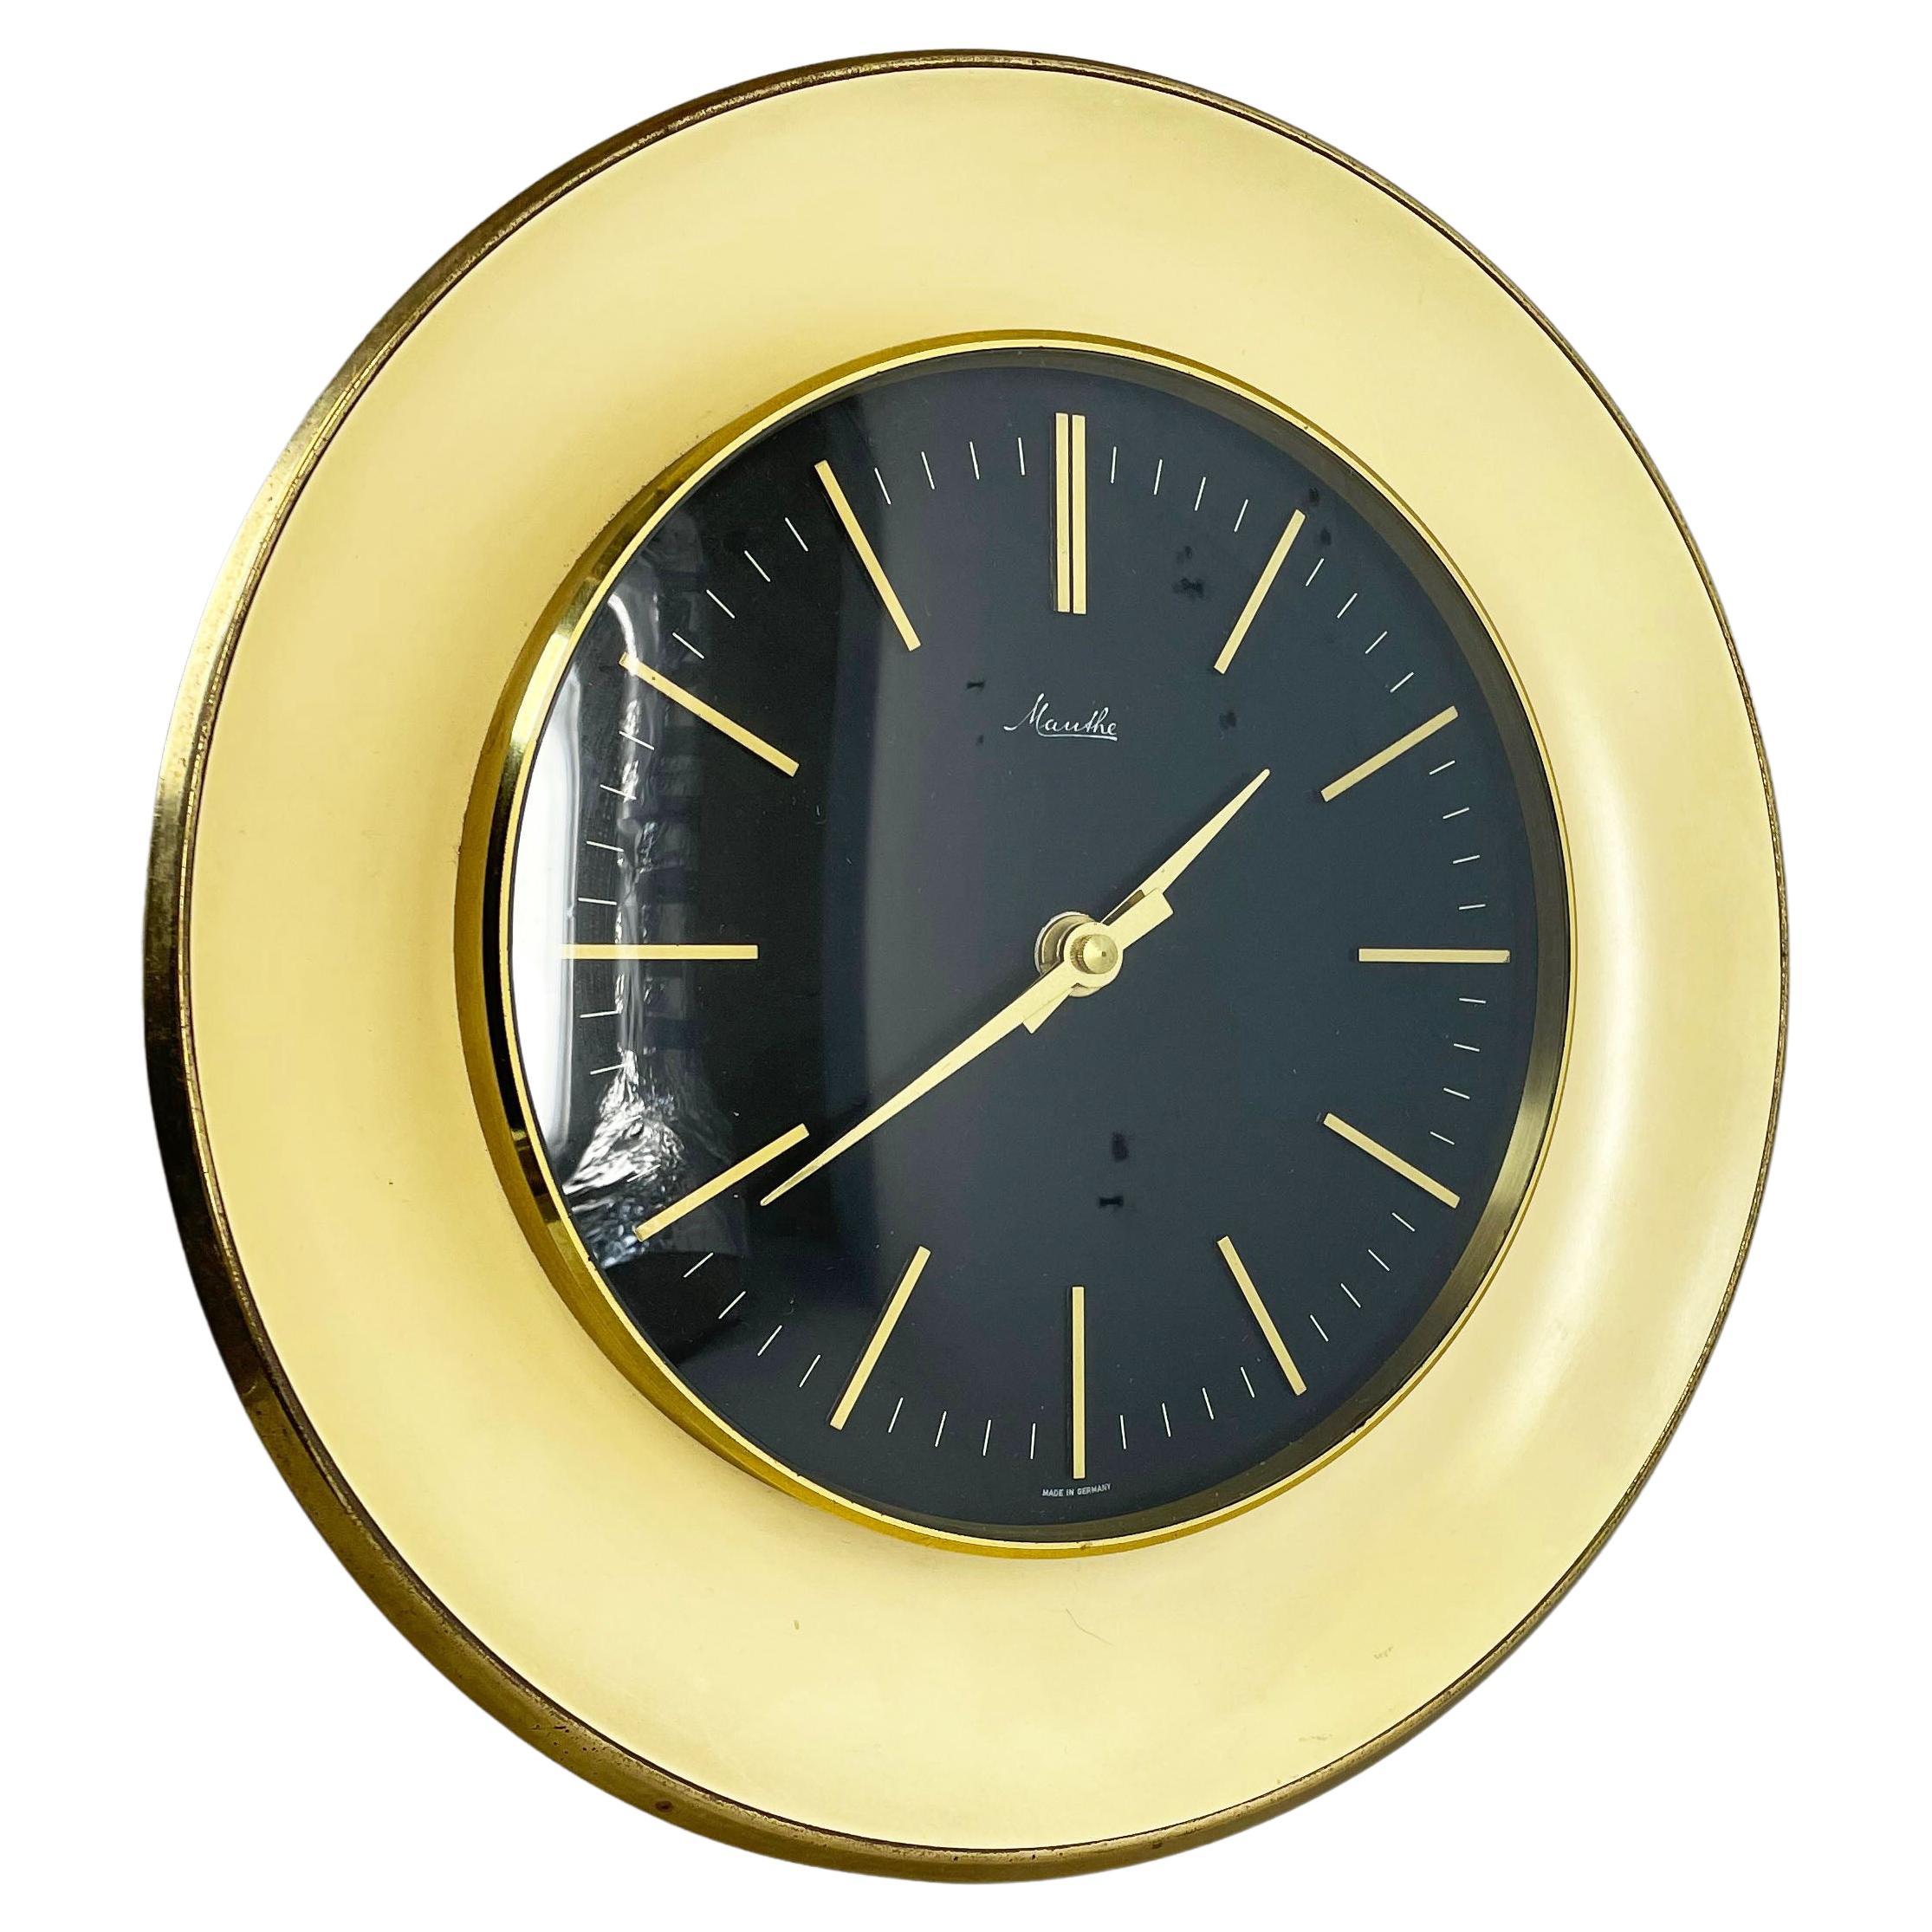 Vintage 1950s Hollywood Regency Brass Wall Clock Mauthe Electric, Germany